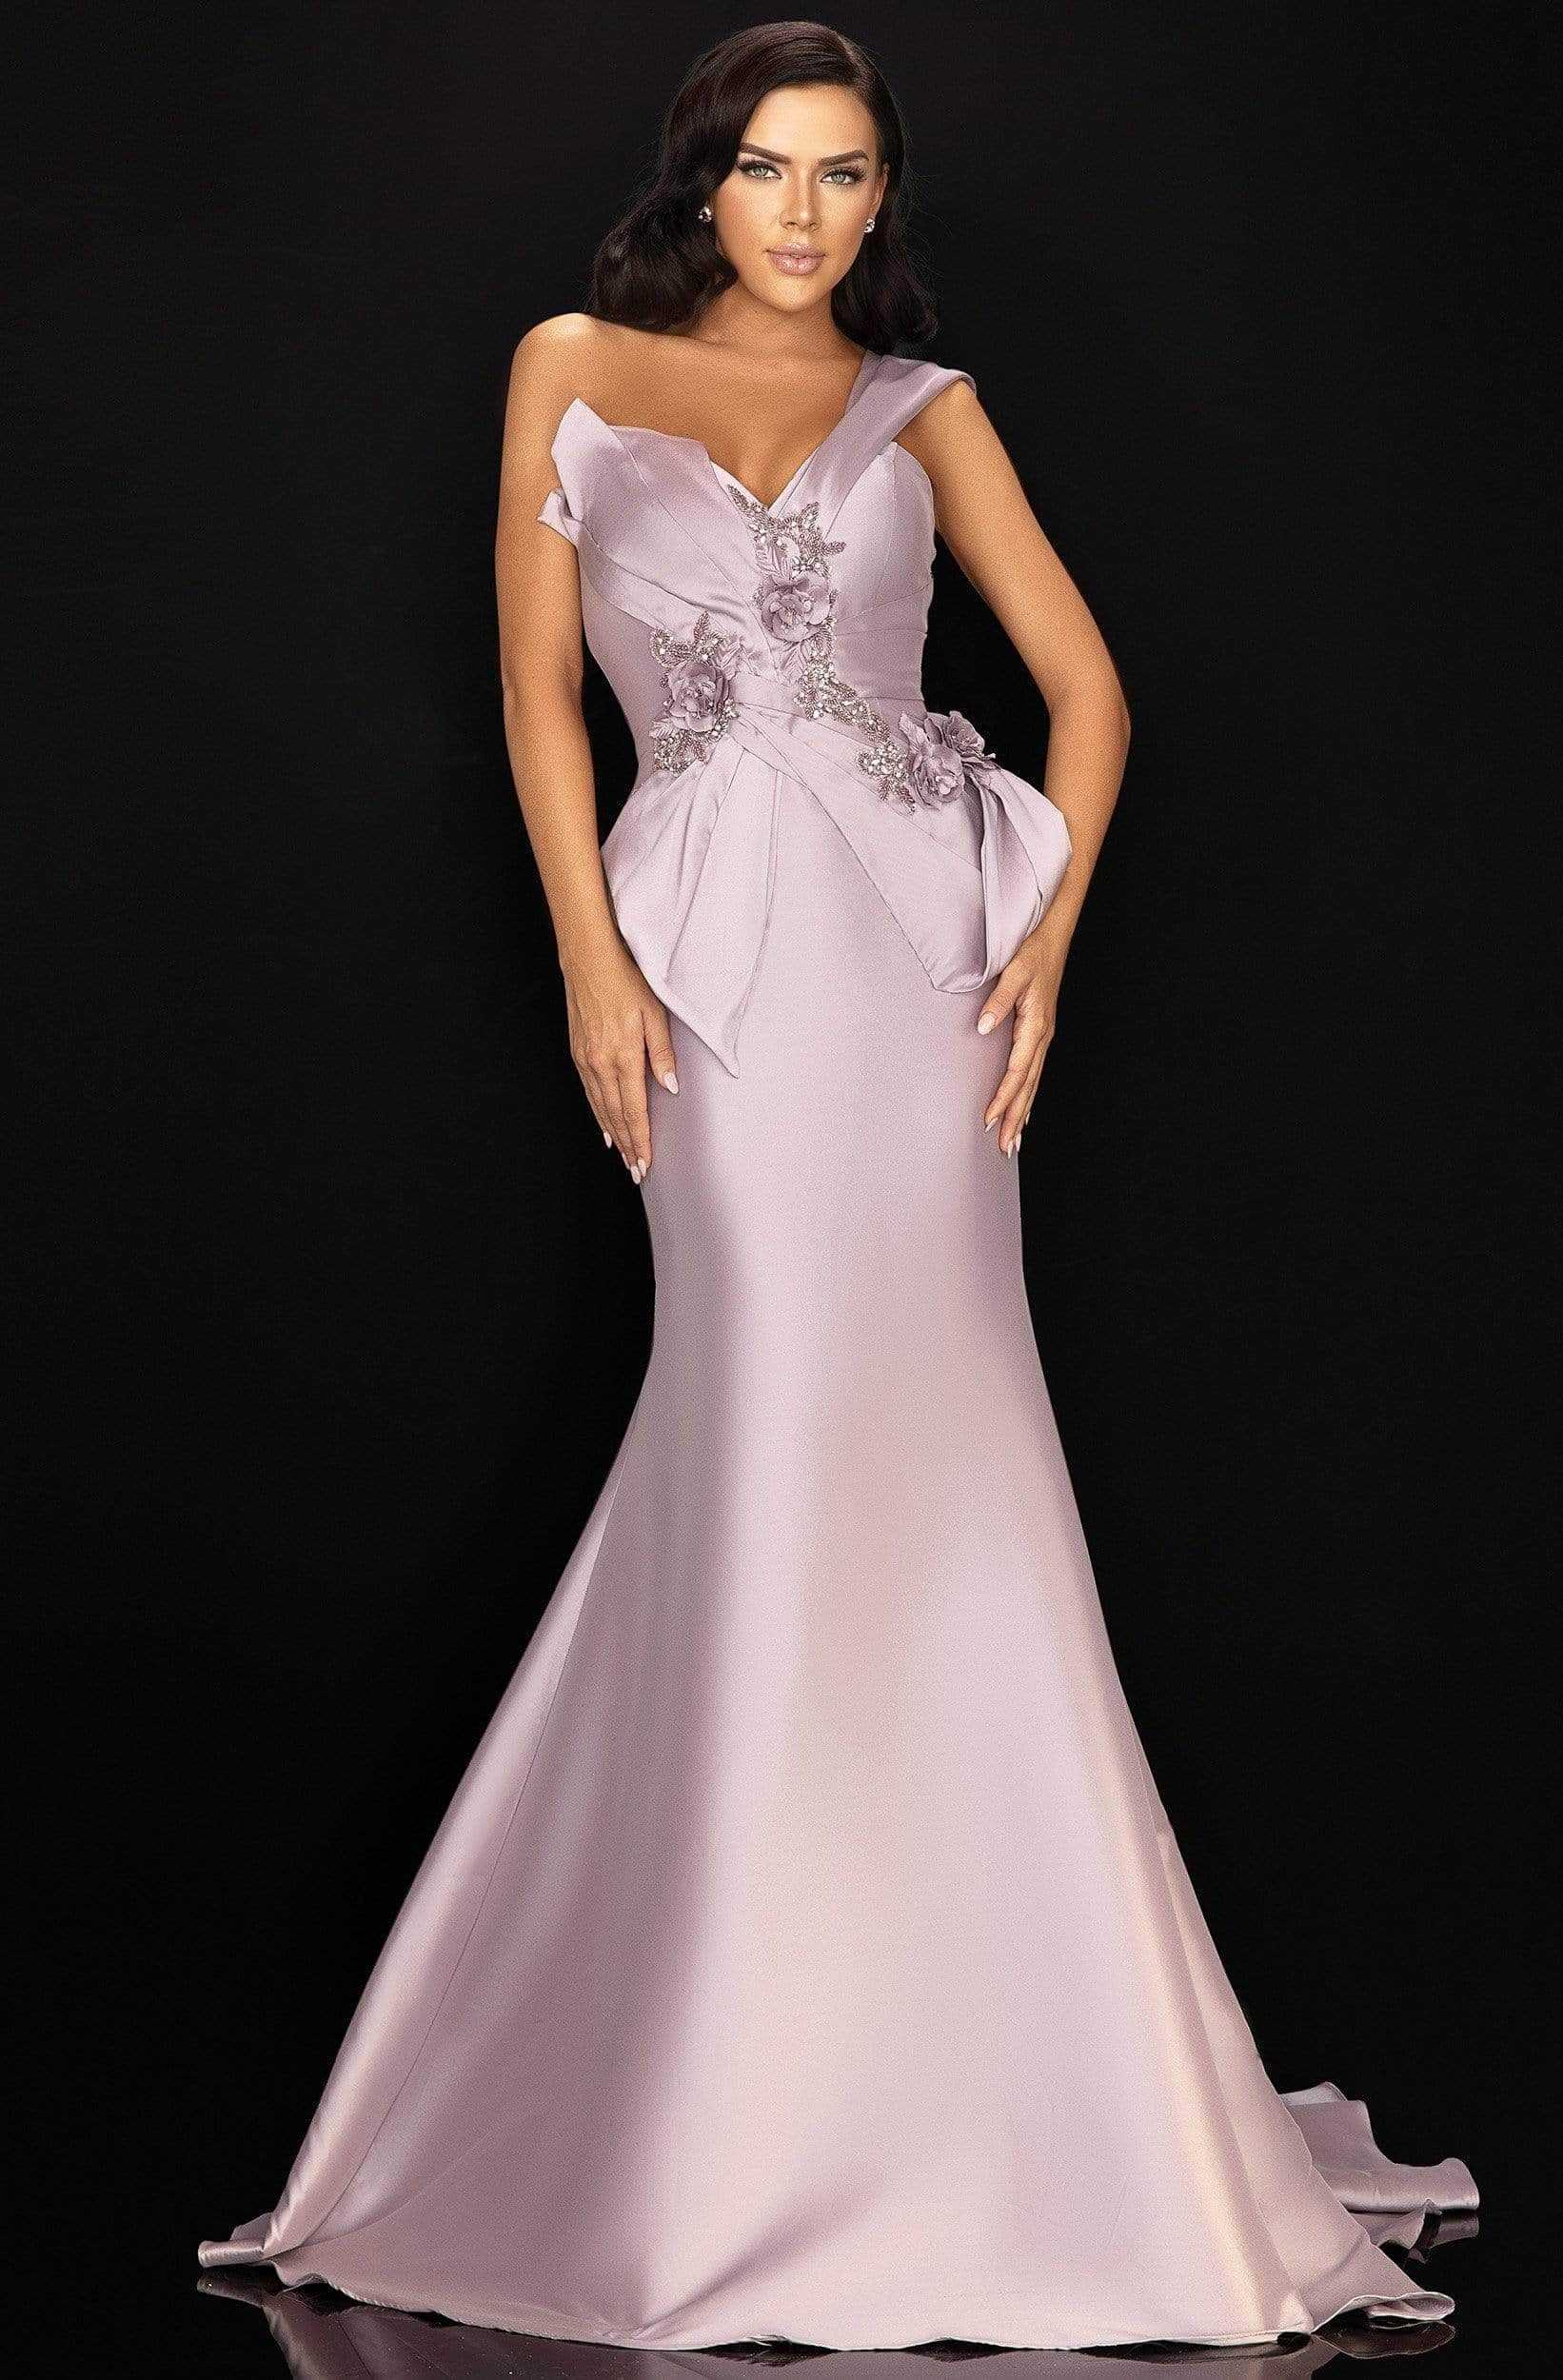 Terani Couture, Terani Couture - 2011M2160 Beaded Floral Gown